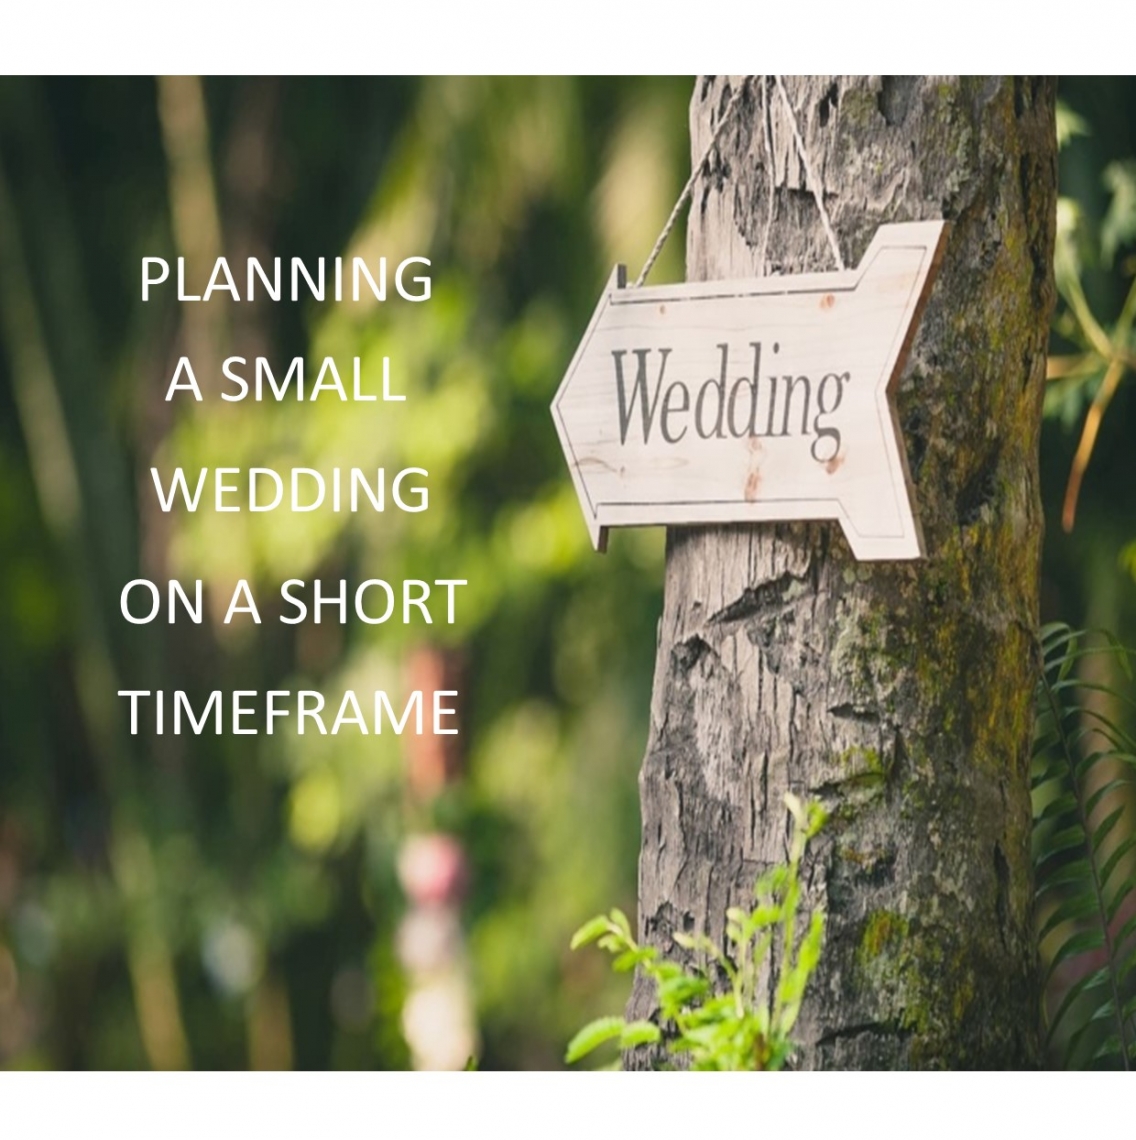 PLANNING A SMALL WEDDING ON A SHORT TIMEFRAME